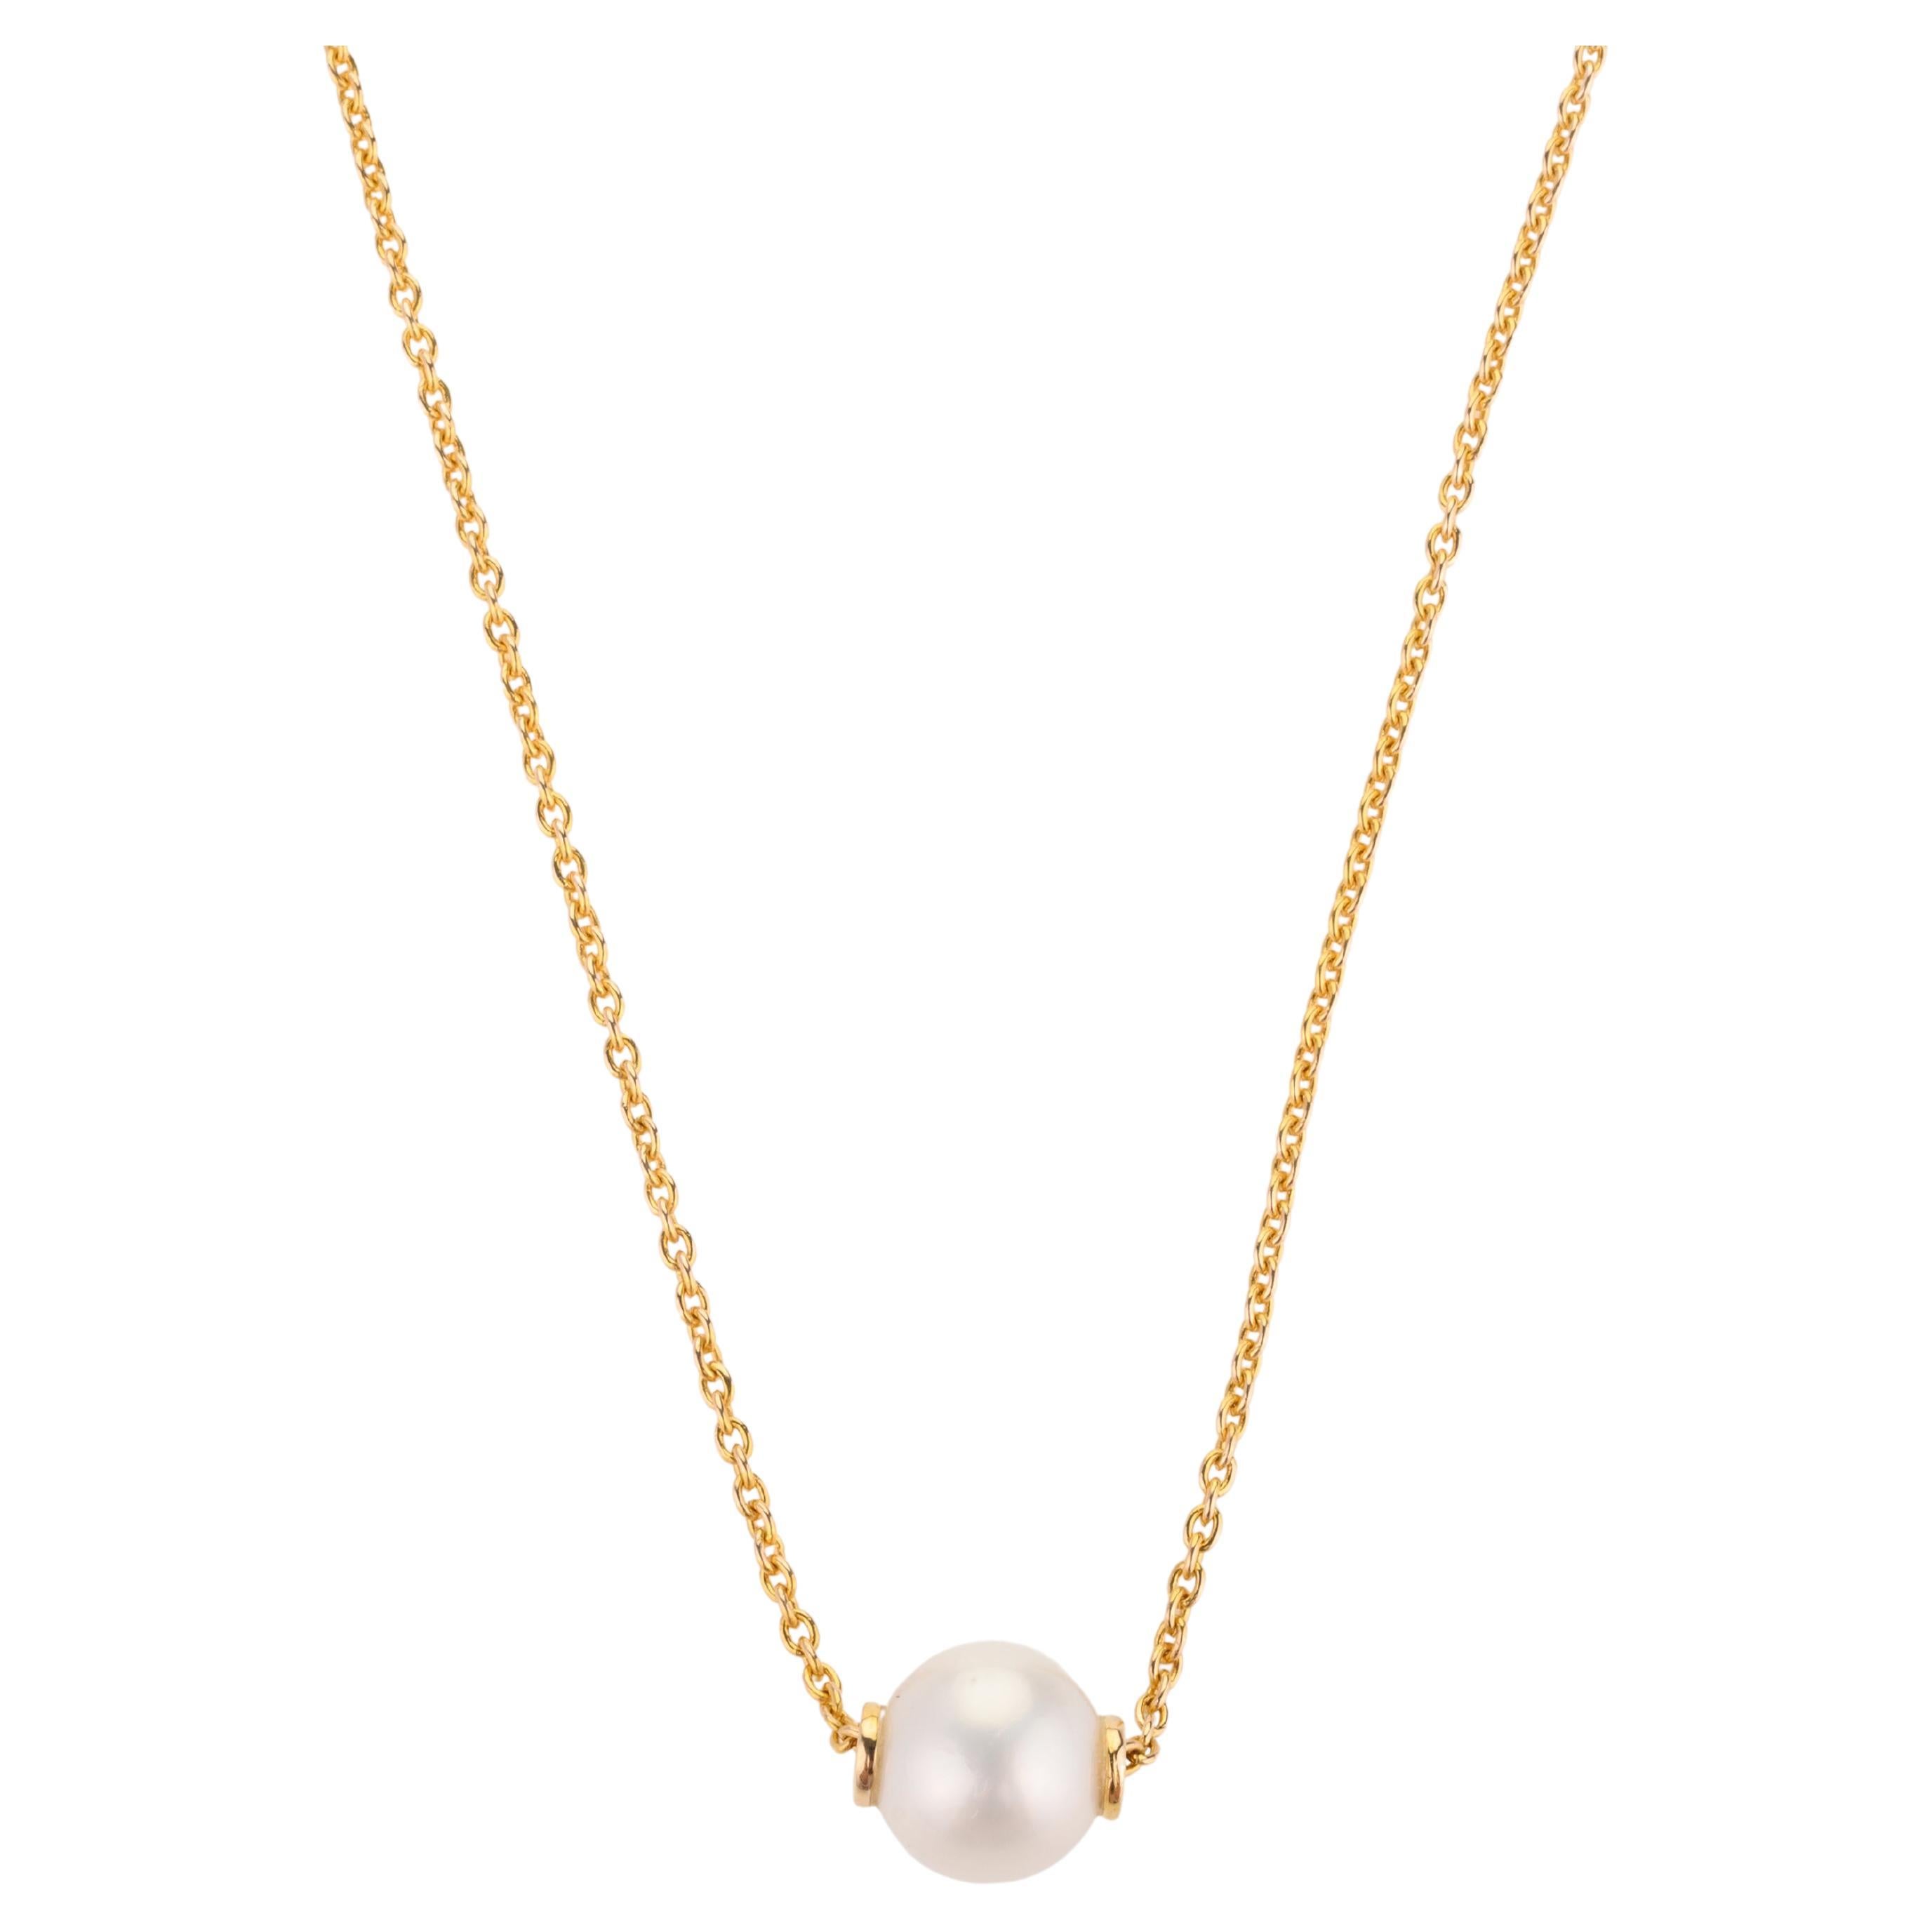 Modern 5 Carat Single Pearl Chain Necklace in 18k Solid Yellow Gold